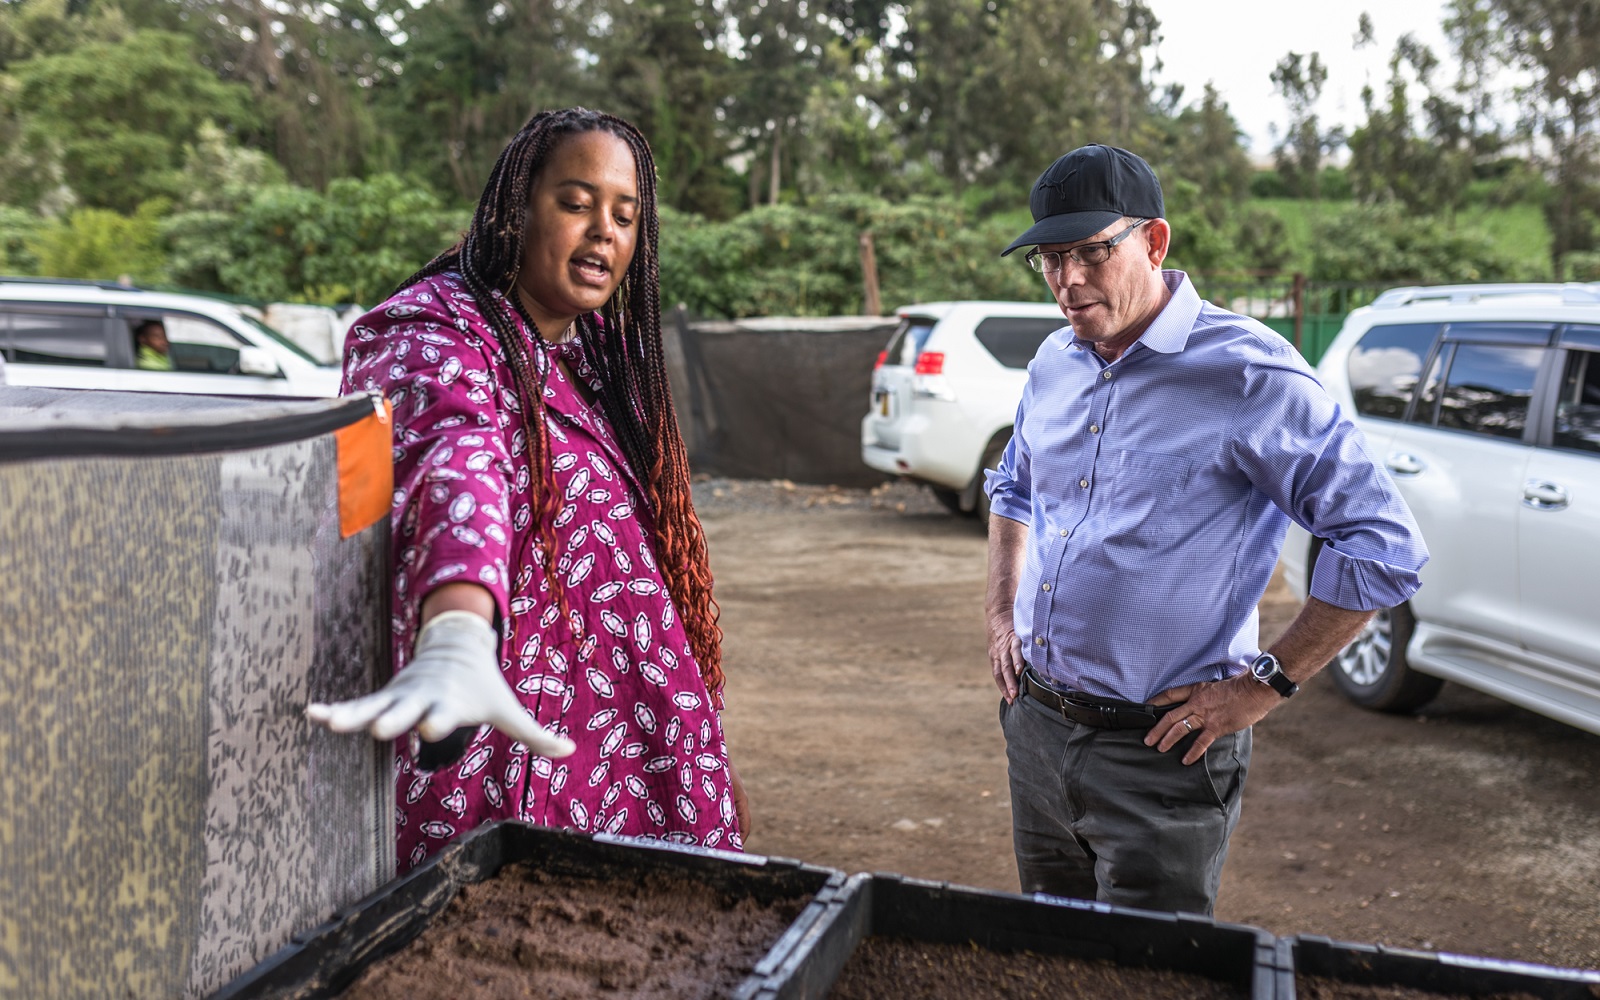 Mark Suzman, the CEO of the Bill & Melinda Foundation, with Talash Hujibers, the founder and CEO of InsectiPro, during their visit to the insect breeding facility in Limuru, Kenya, on April 27, 2023. InsectiPro breeds black soldier flies and crickets and aims to secure Africa's future by providing sustainable protein sources. The black soldier flies are used to produce animal feed and fertilizer, while the crickets are processed into high-protein food snacks for human consumption.